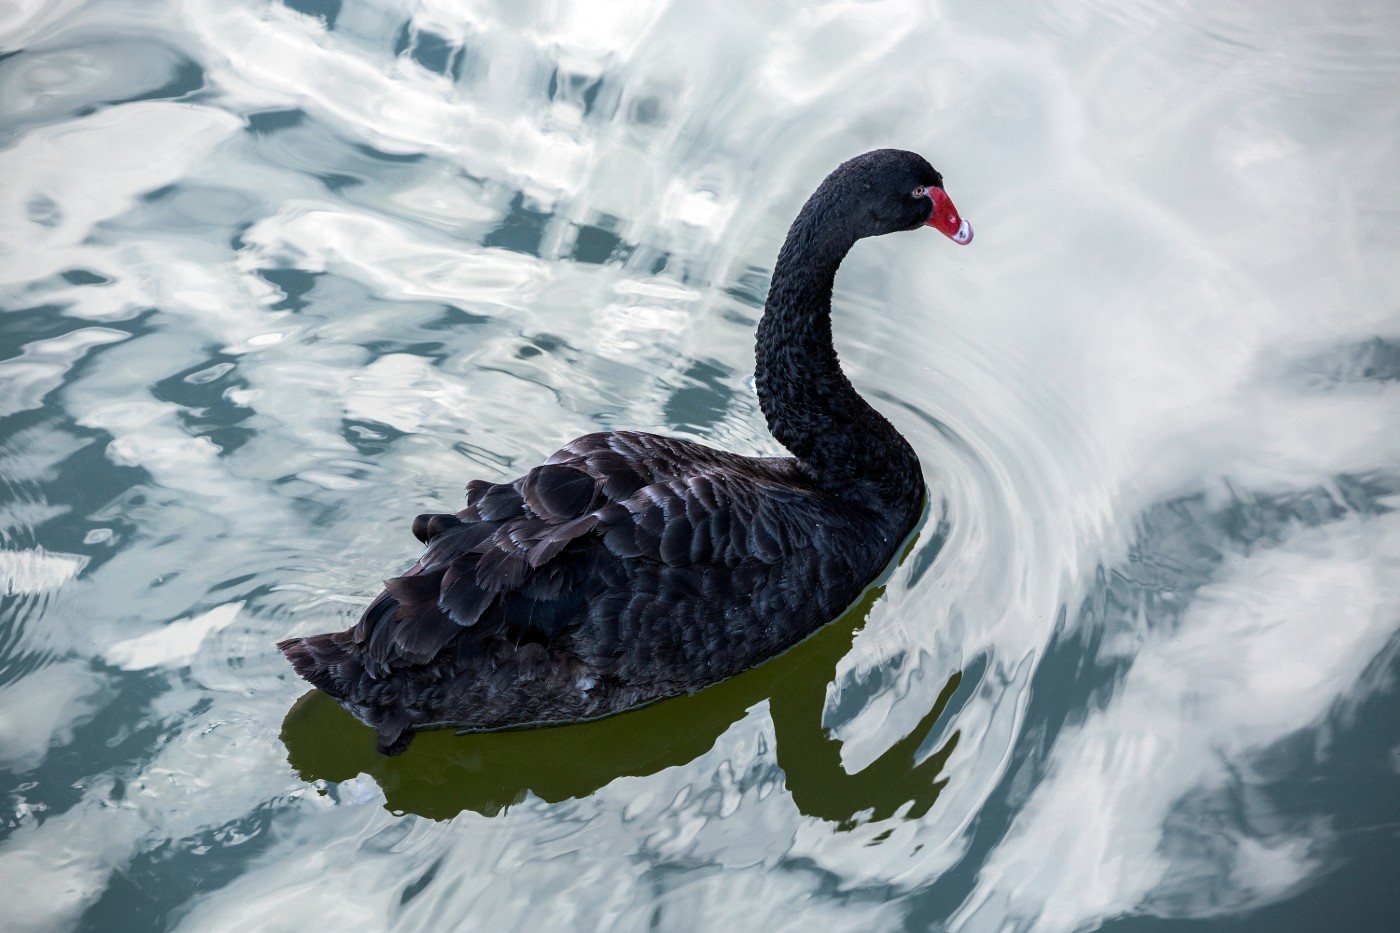 https://tickertapecdn.tdameritrade.com/assets/images/pages/md/black swan: how to spot and prepare for unpredictable events